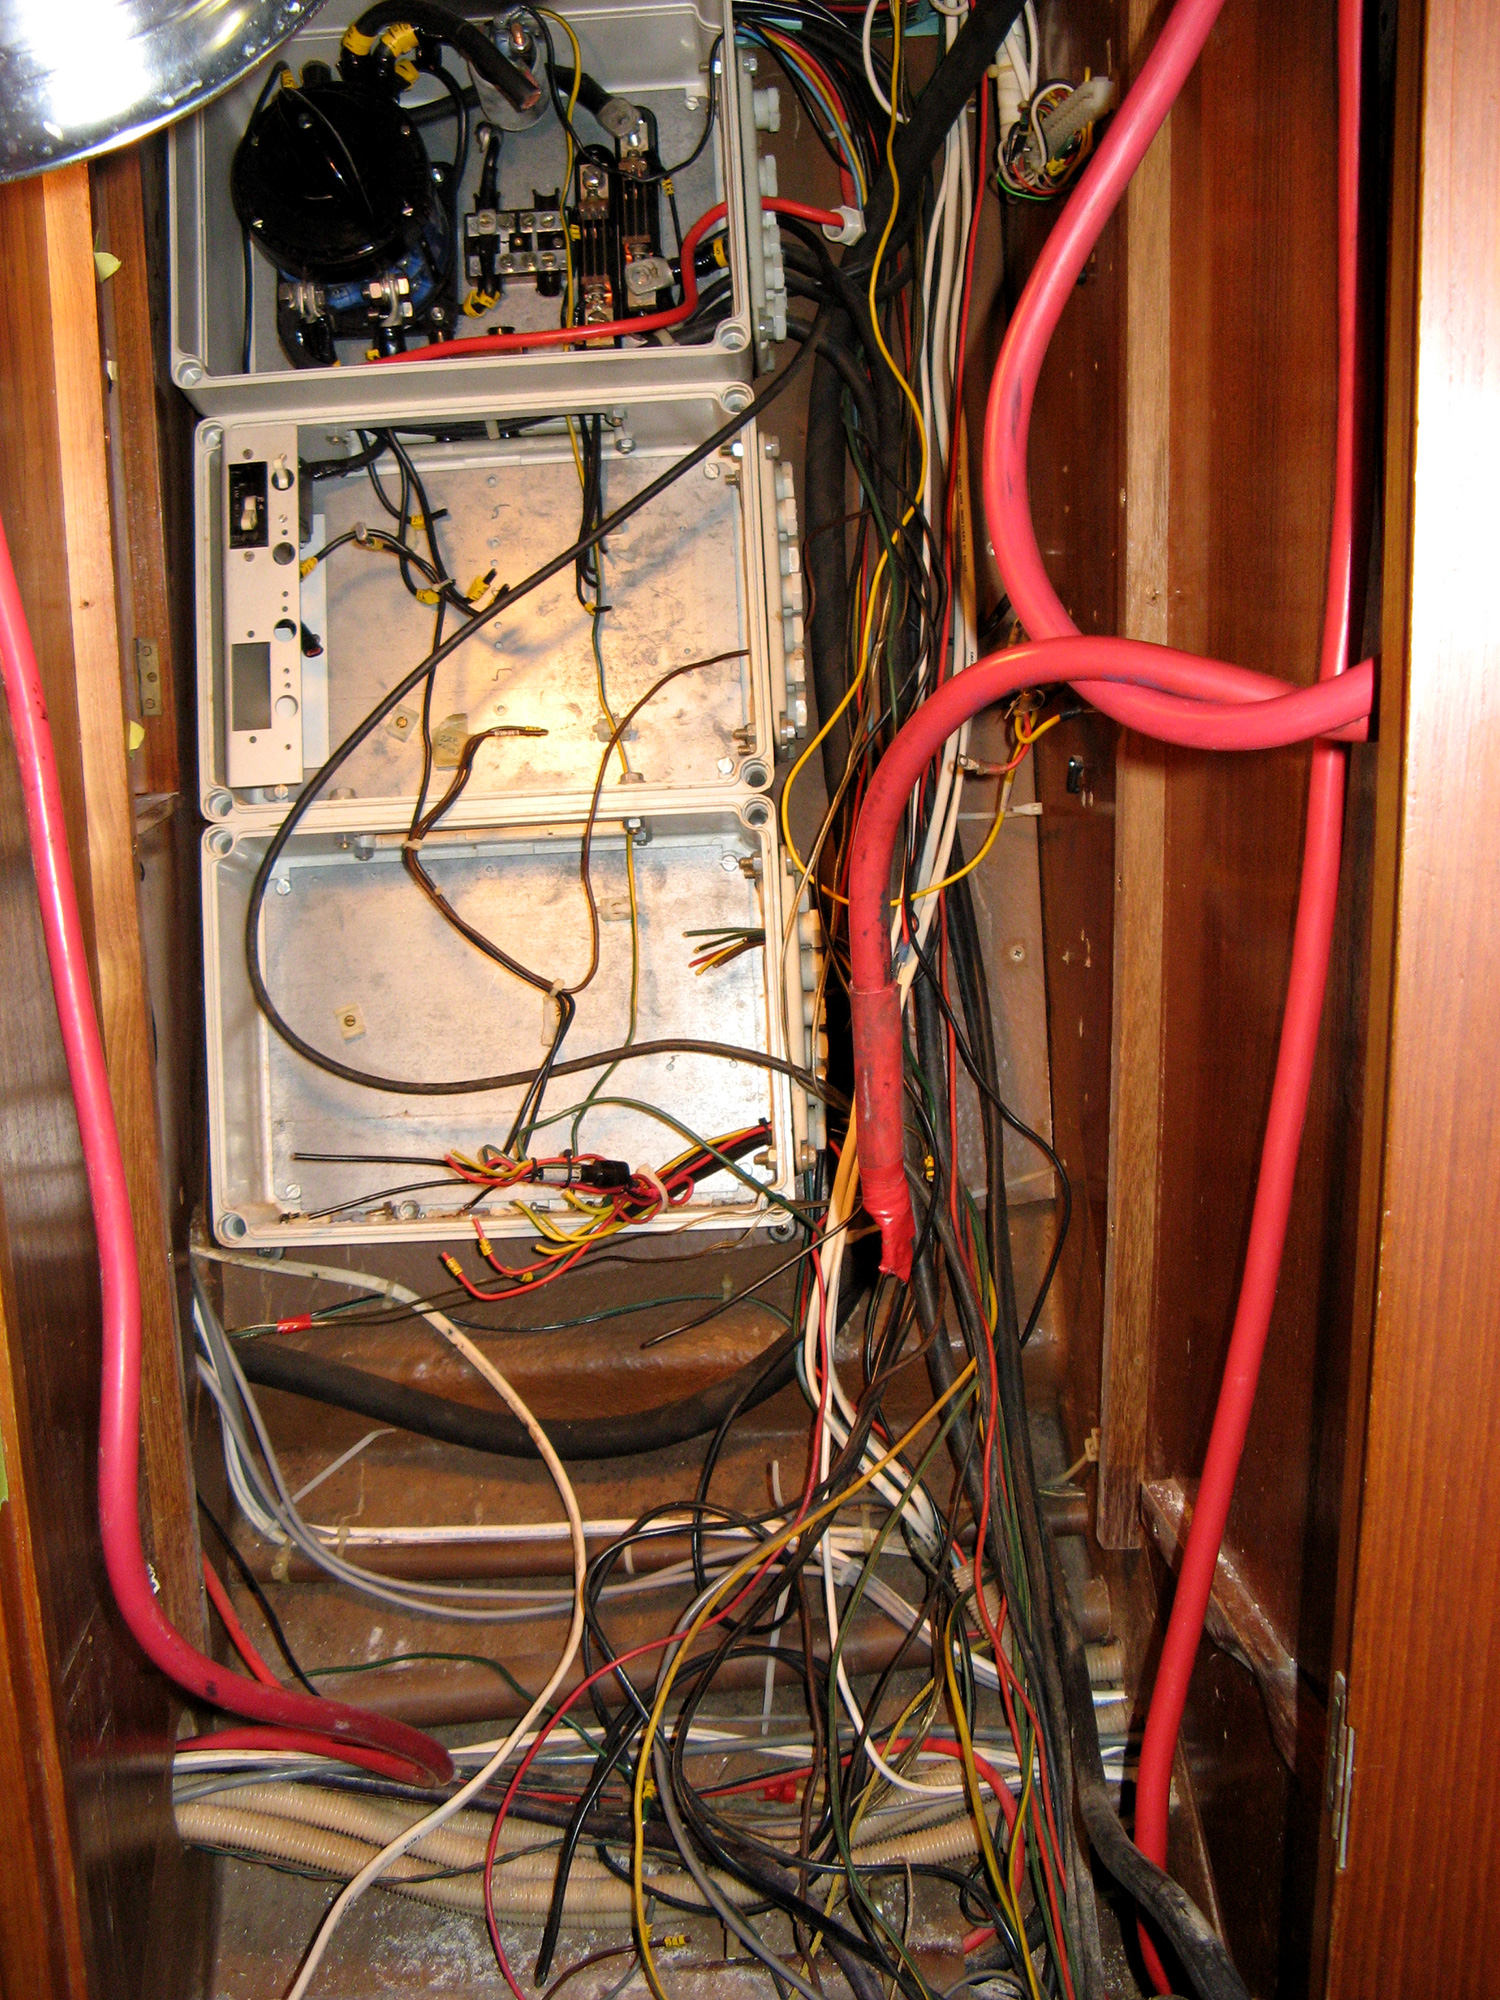 ELECTRICAL SYSTEM - Before